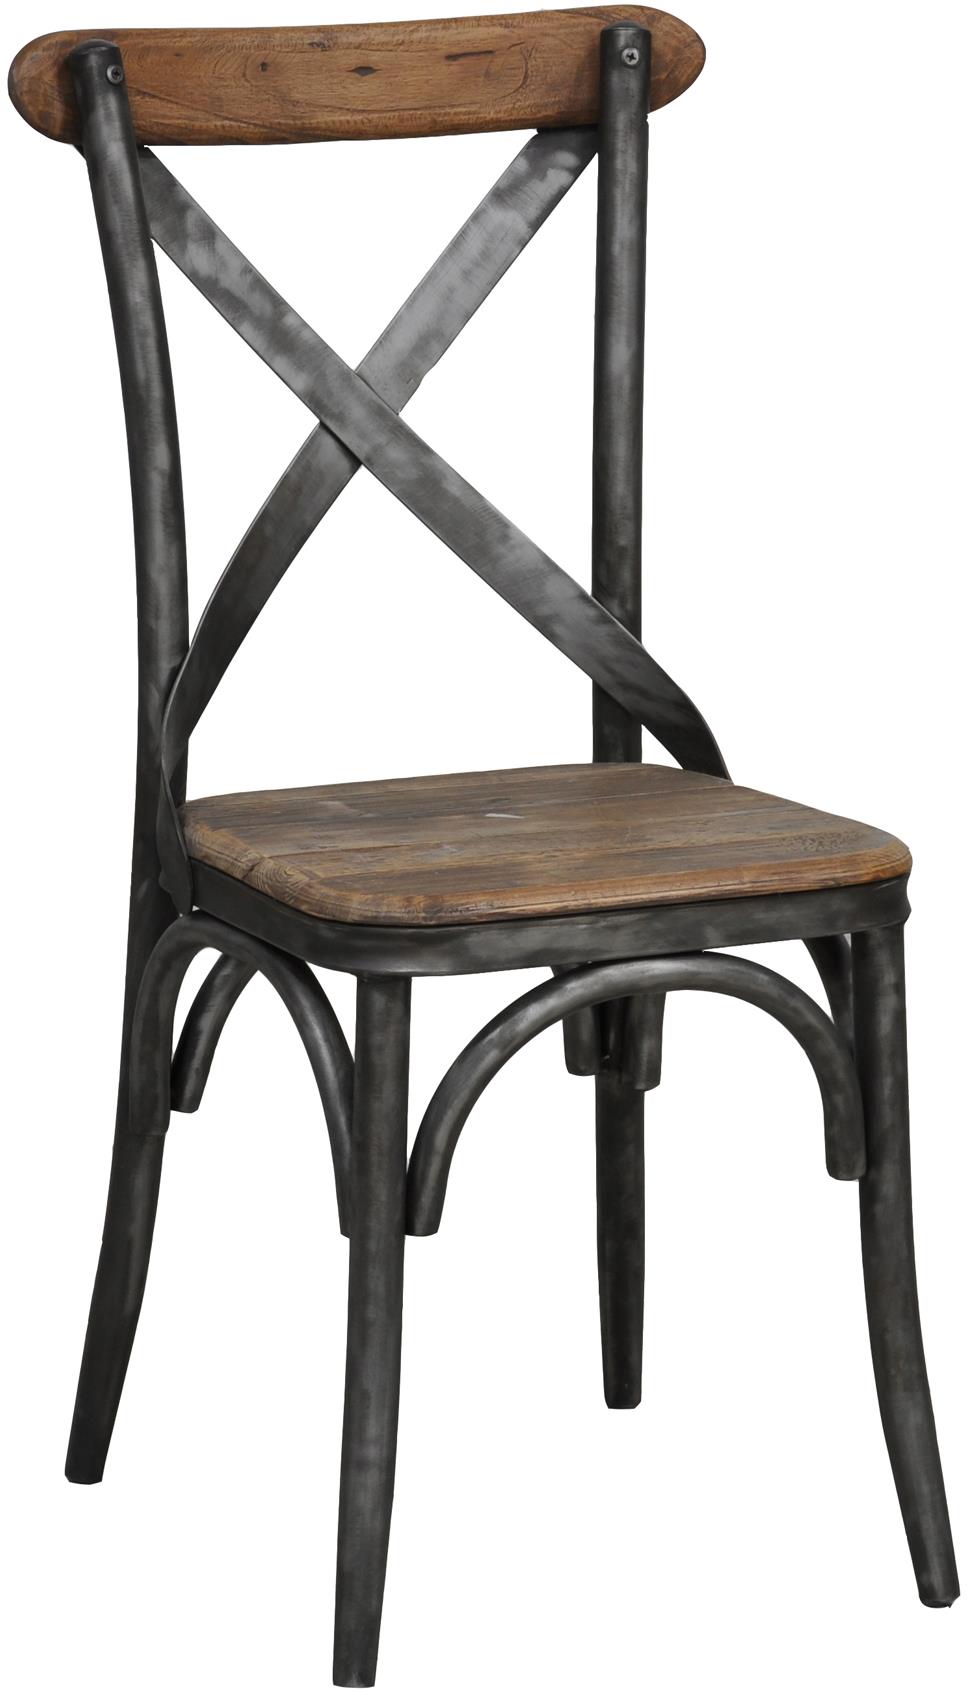 Powell Side Chair with Decorative Metal Construction